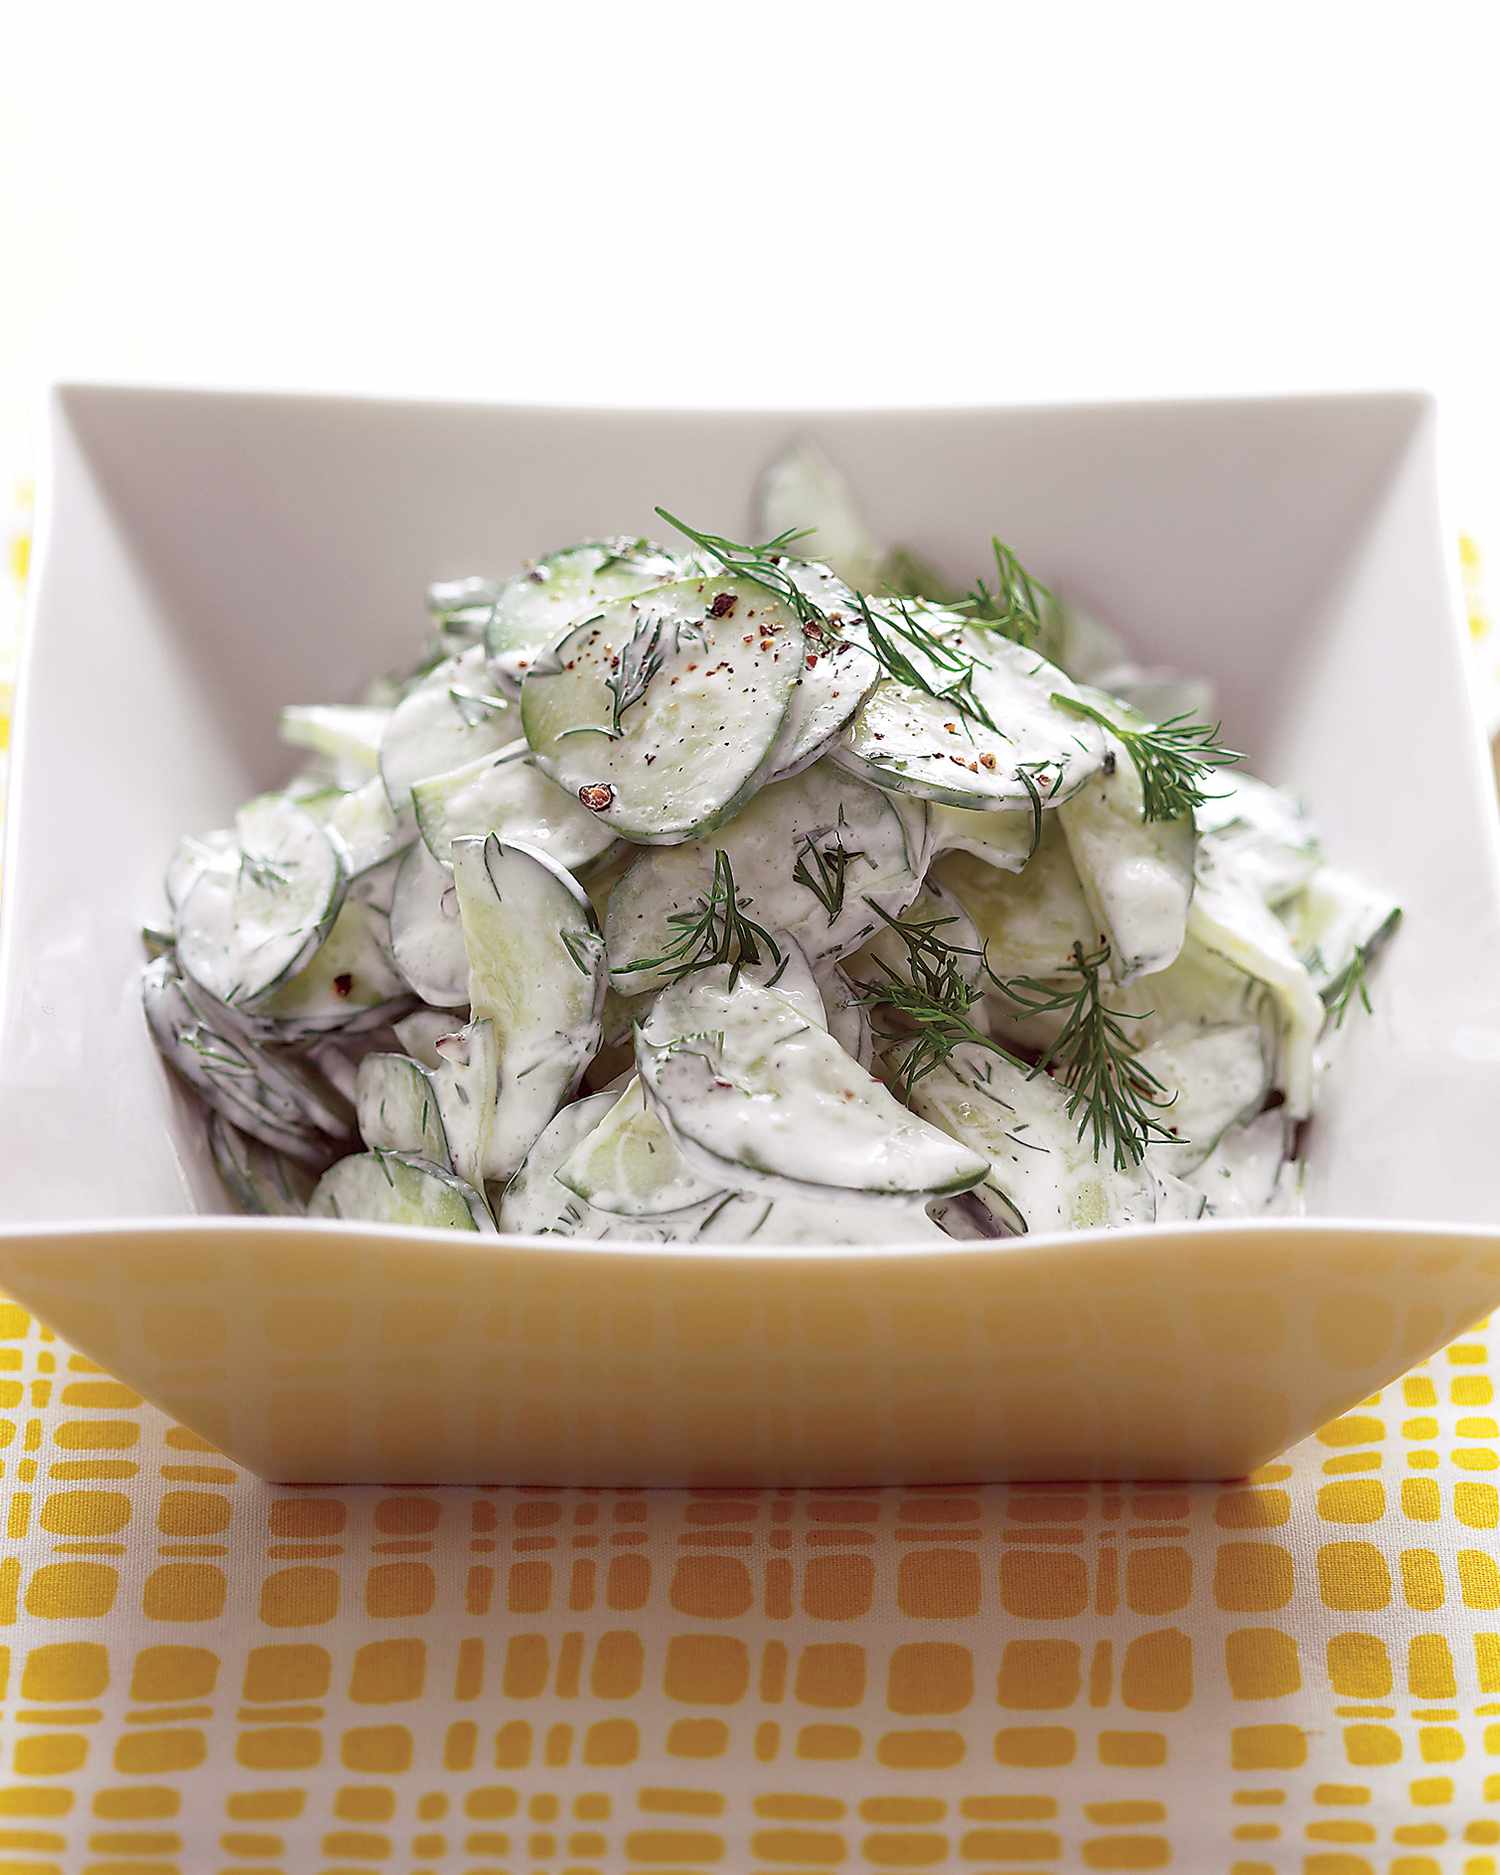 cucumber salad with sour cream and dill dressing